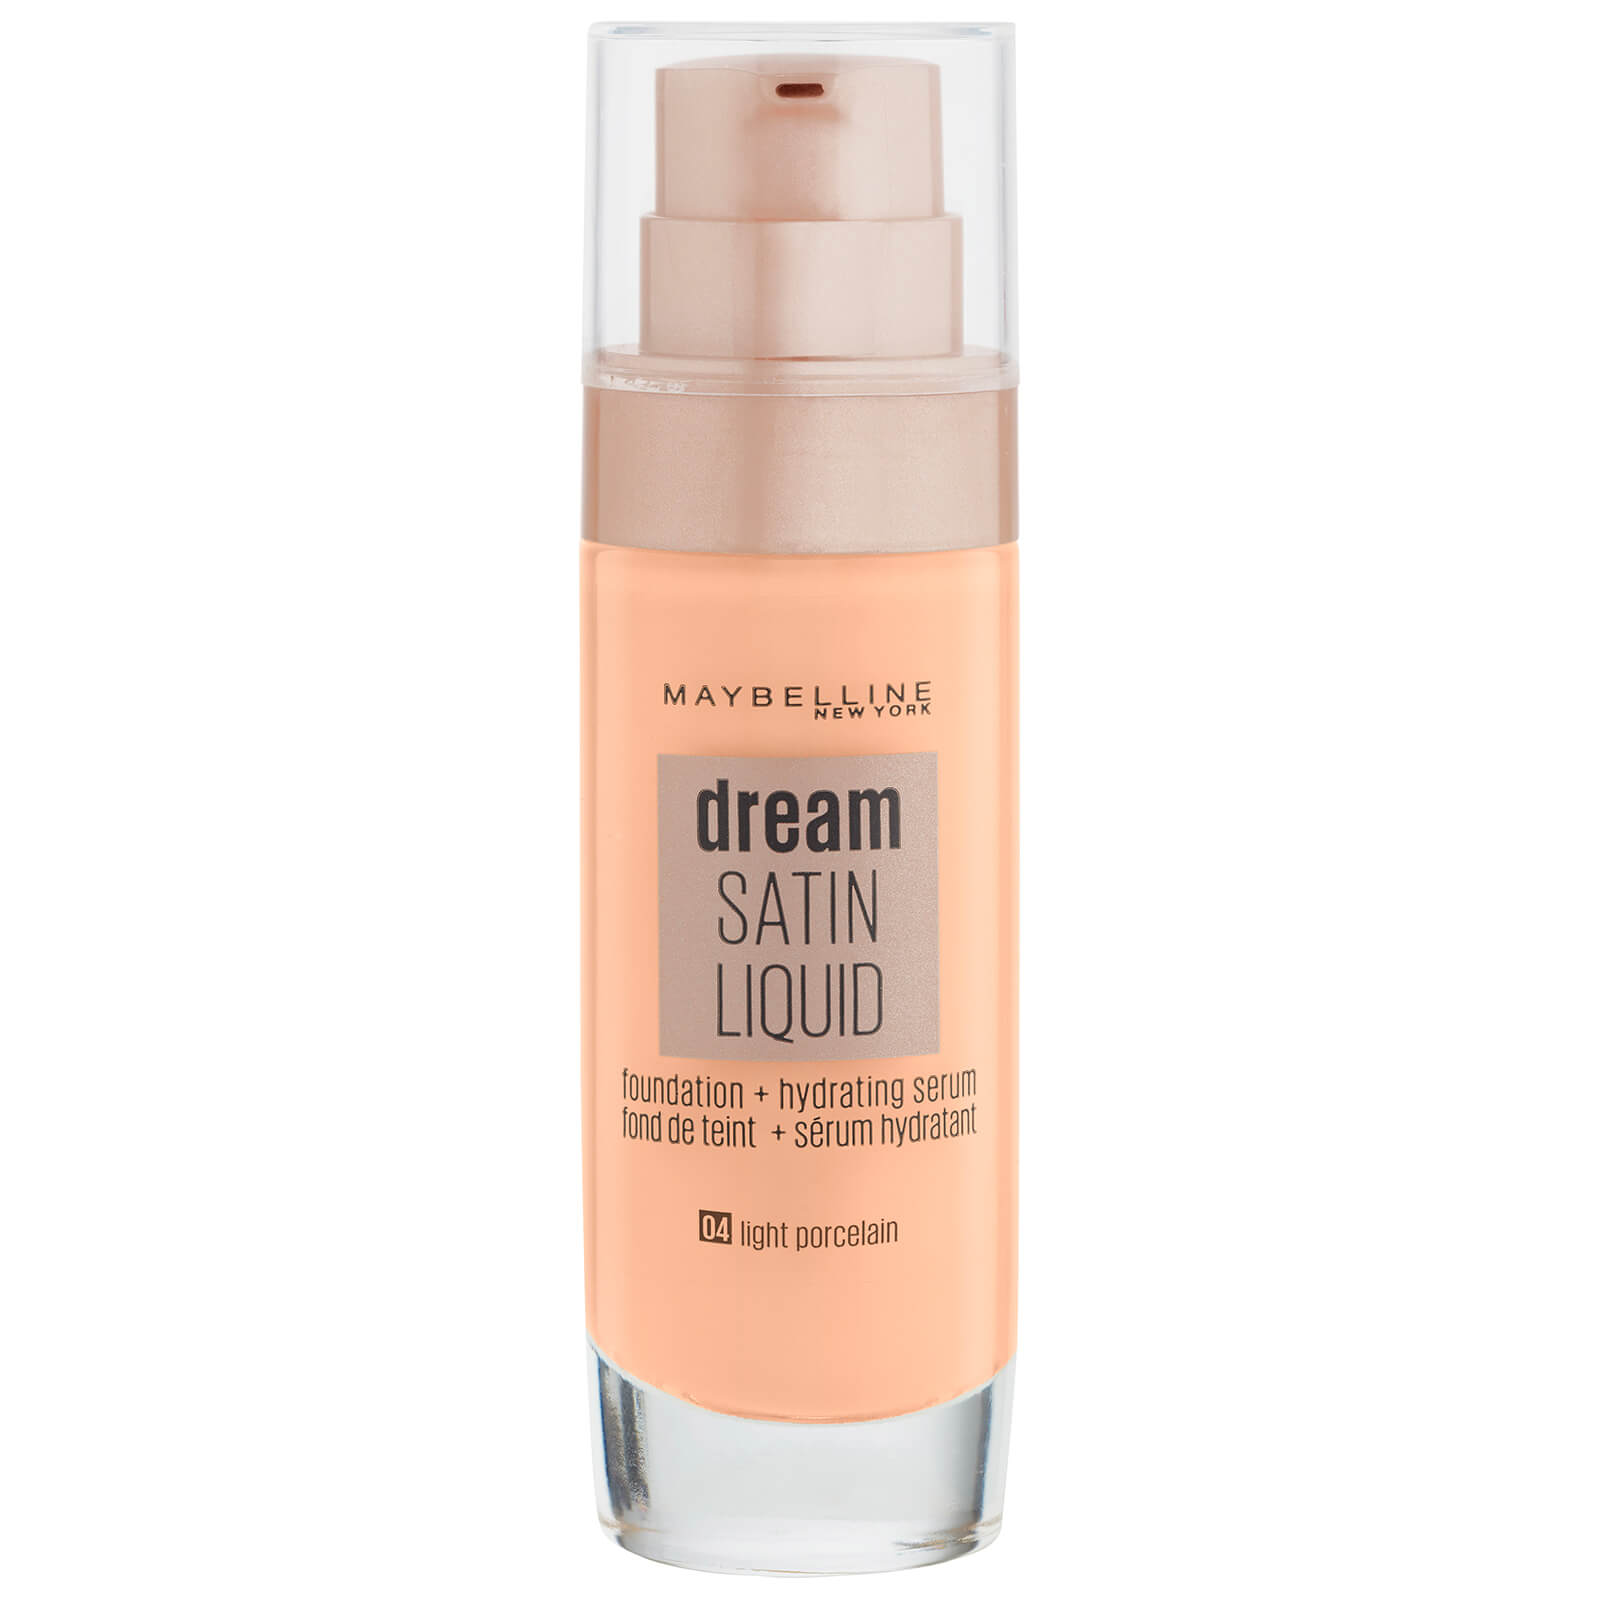 Maybelline Dream Radiant Liquid Hydrating Foundation with Hyaluronic Acid and Collagen 30ml (Various Shades) - 004 Light Porcelain